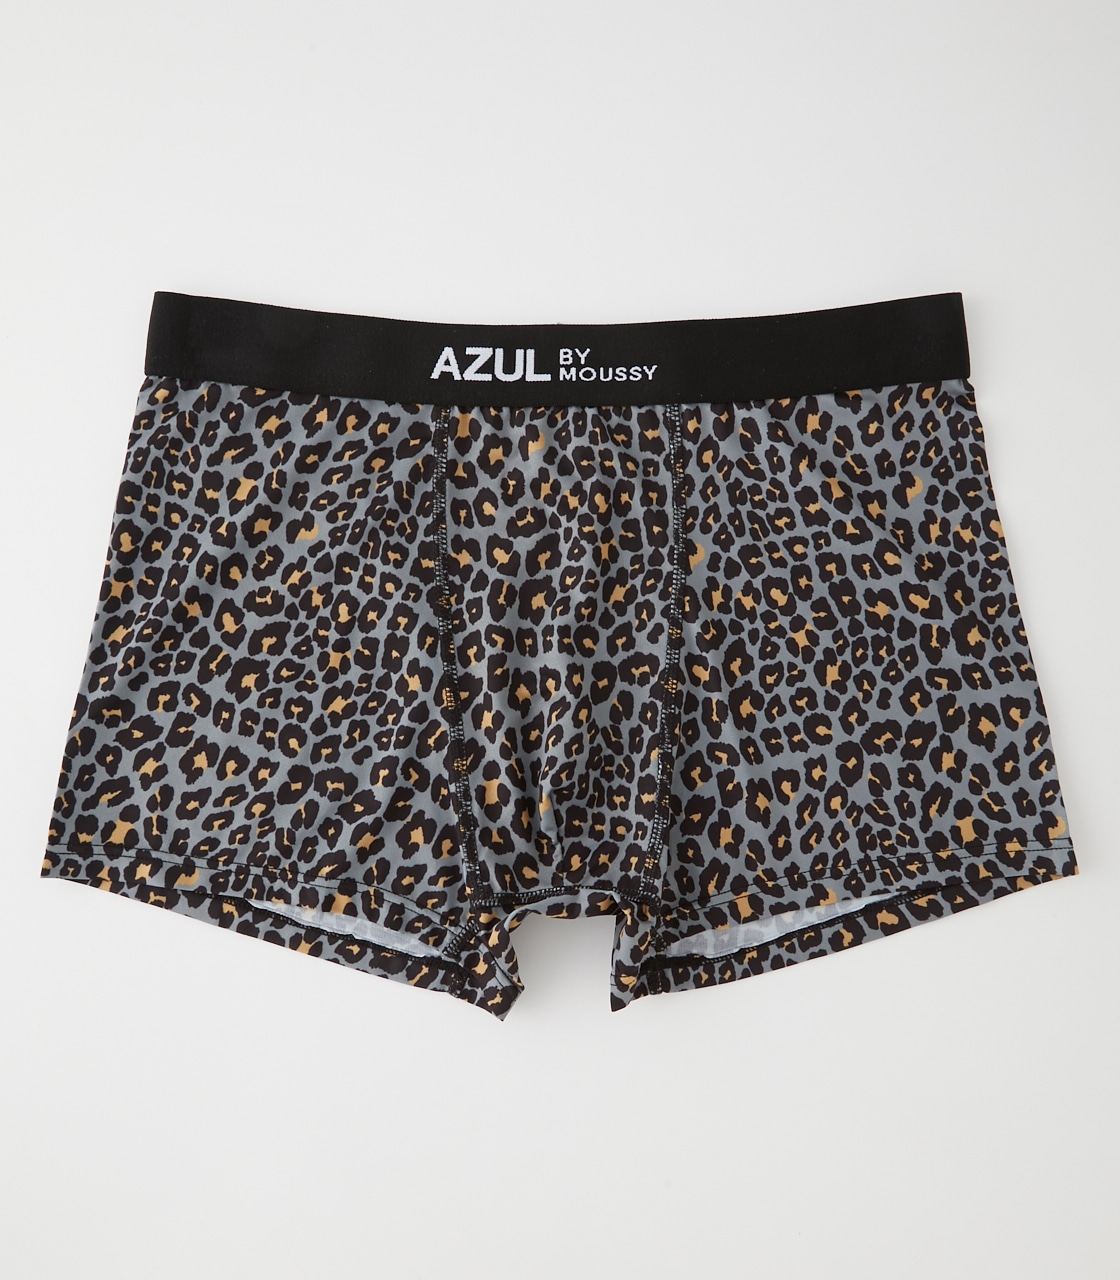 PANTHER BOXER SHORTS/パンサーボクサーショーツ 詳細画像 柄GRY 1